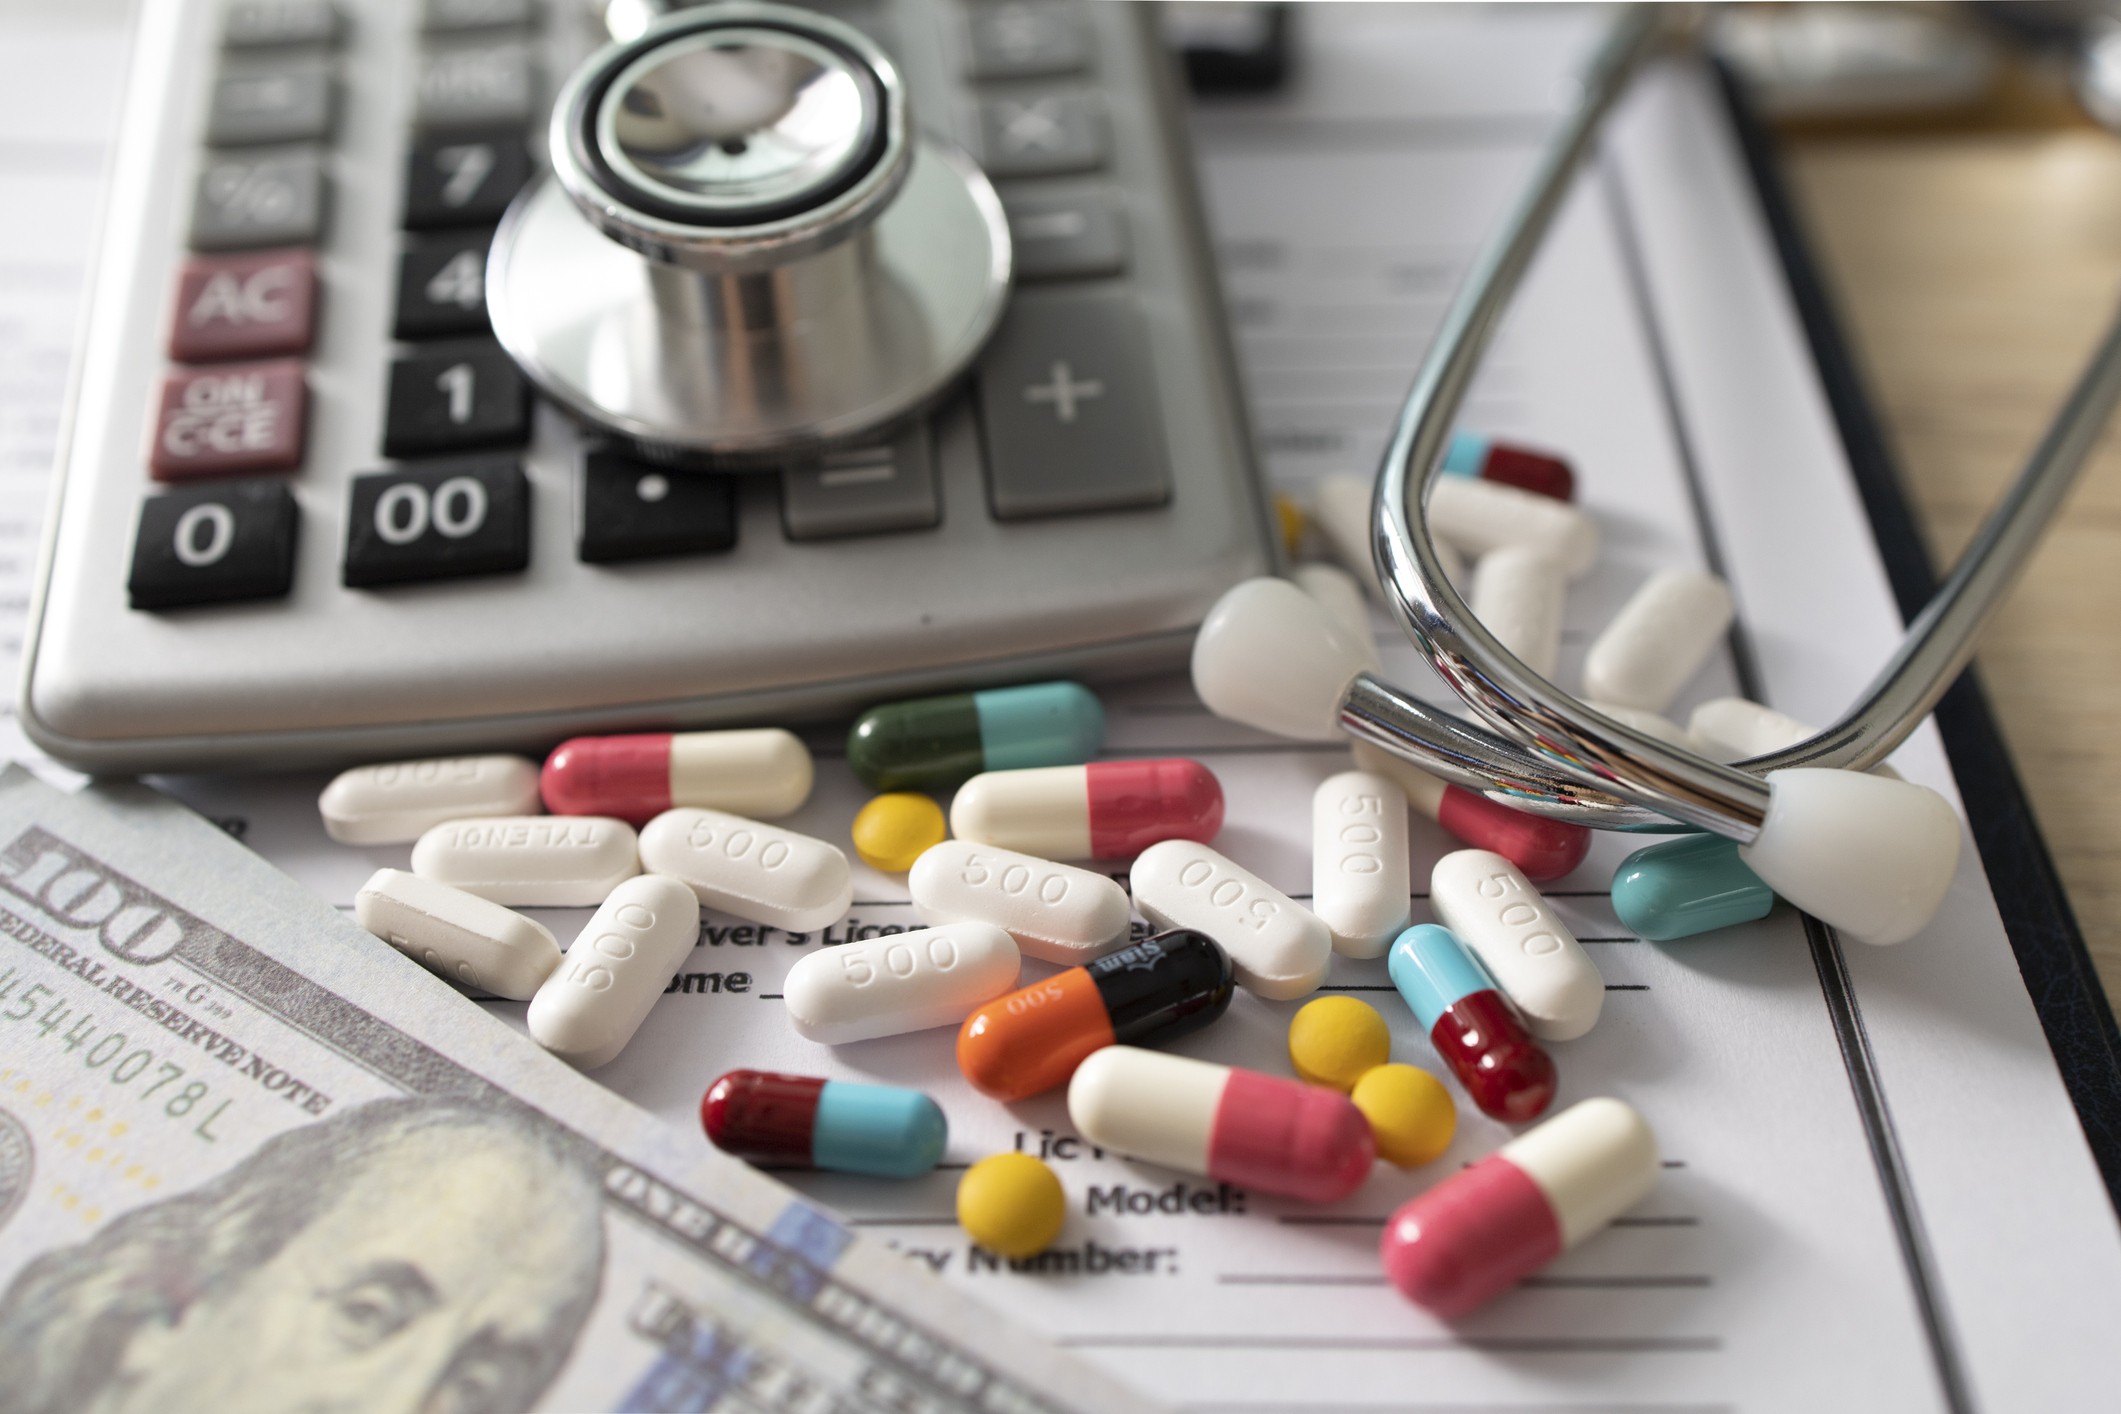 Image of pills next to a calculator and a stethoscope